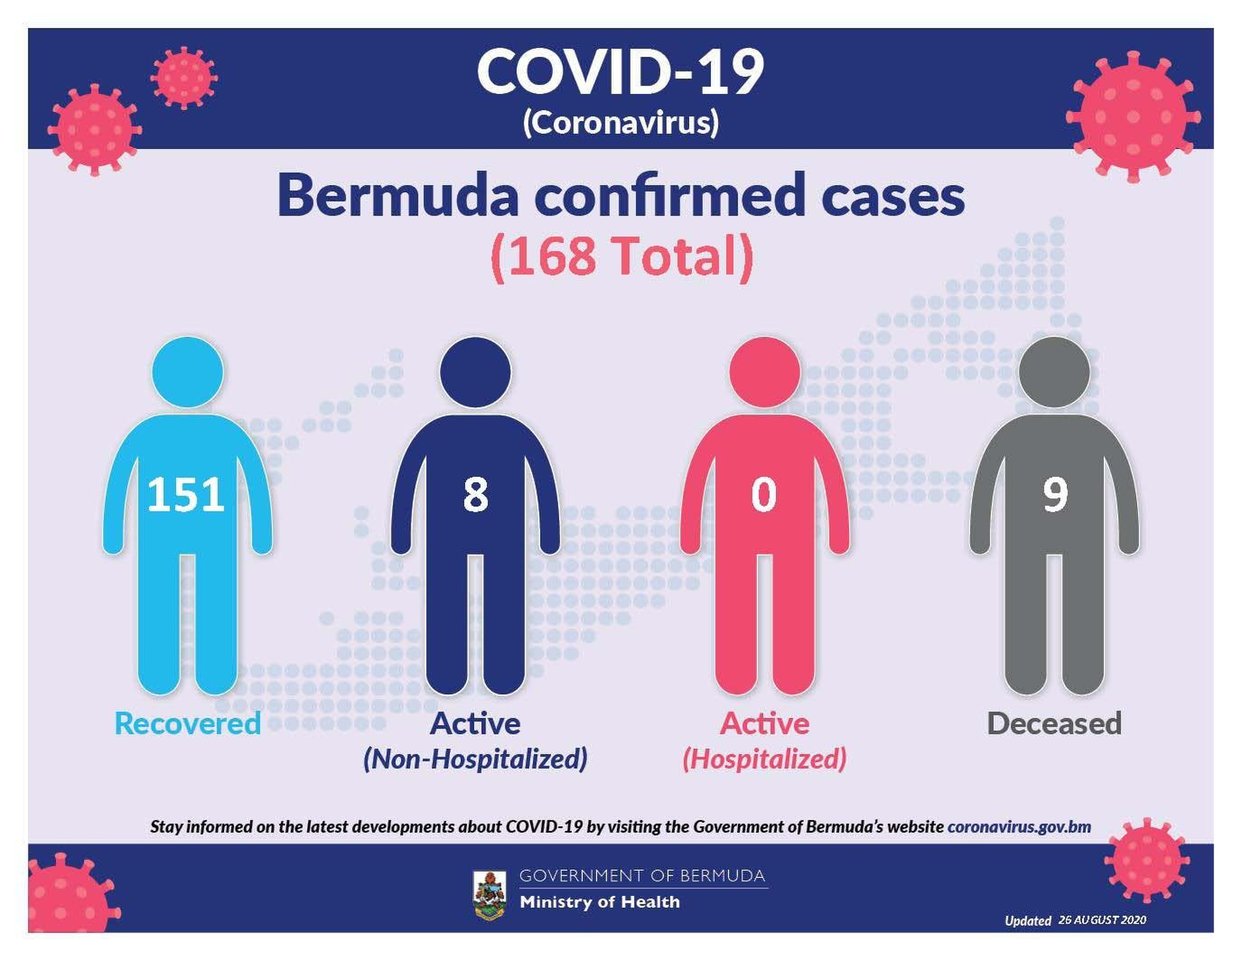 No new COVID-19 cases reported in Bermuda, 26 August